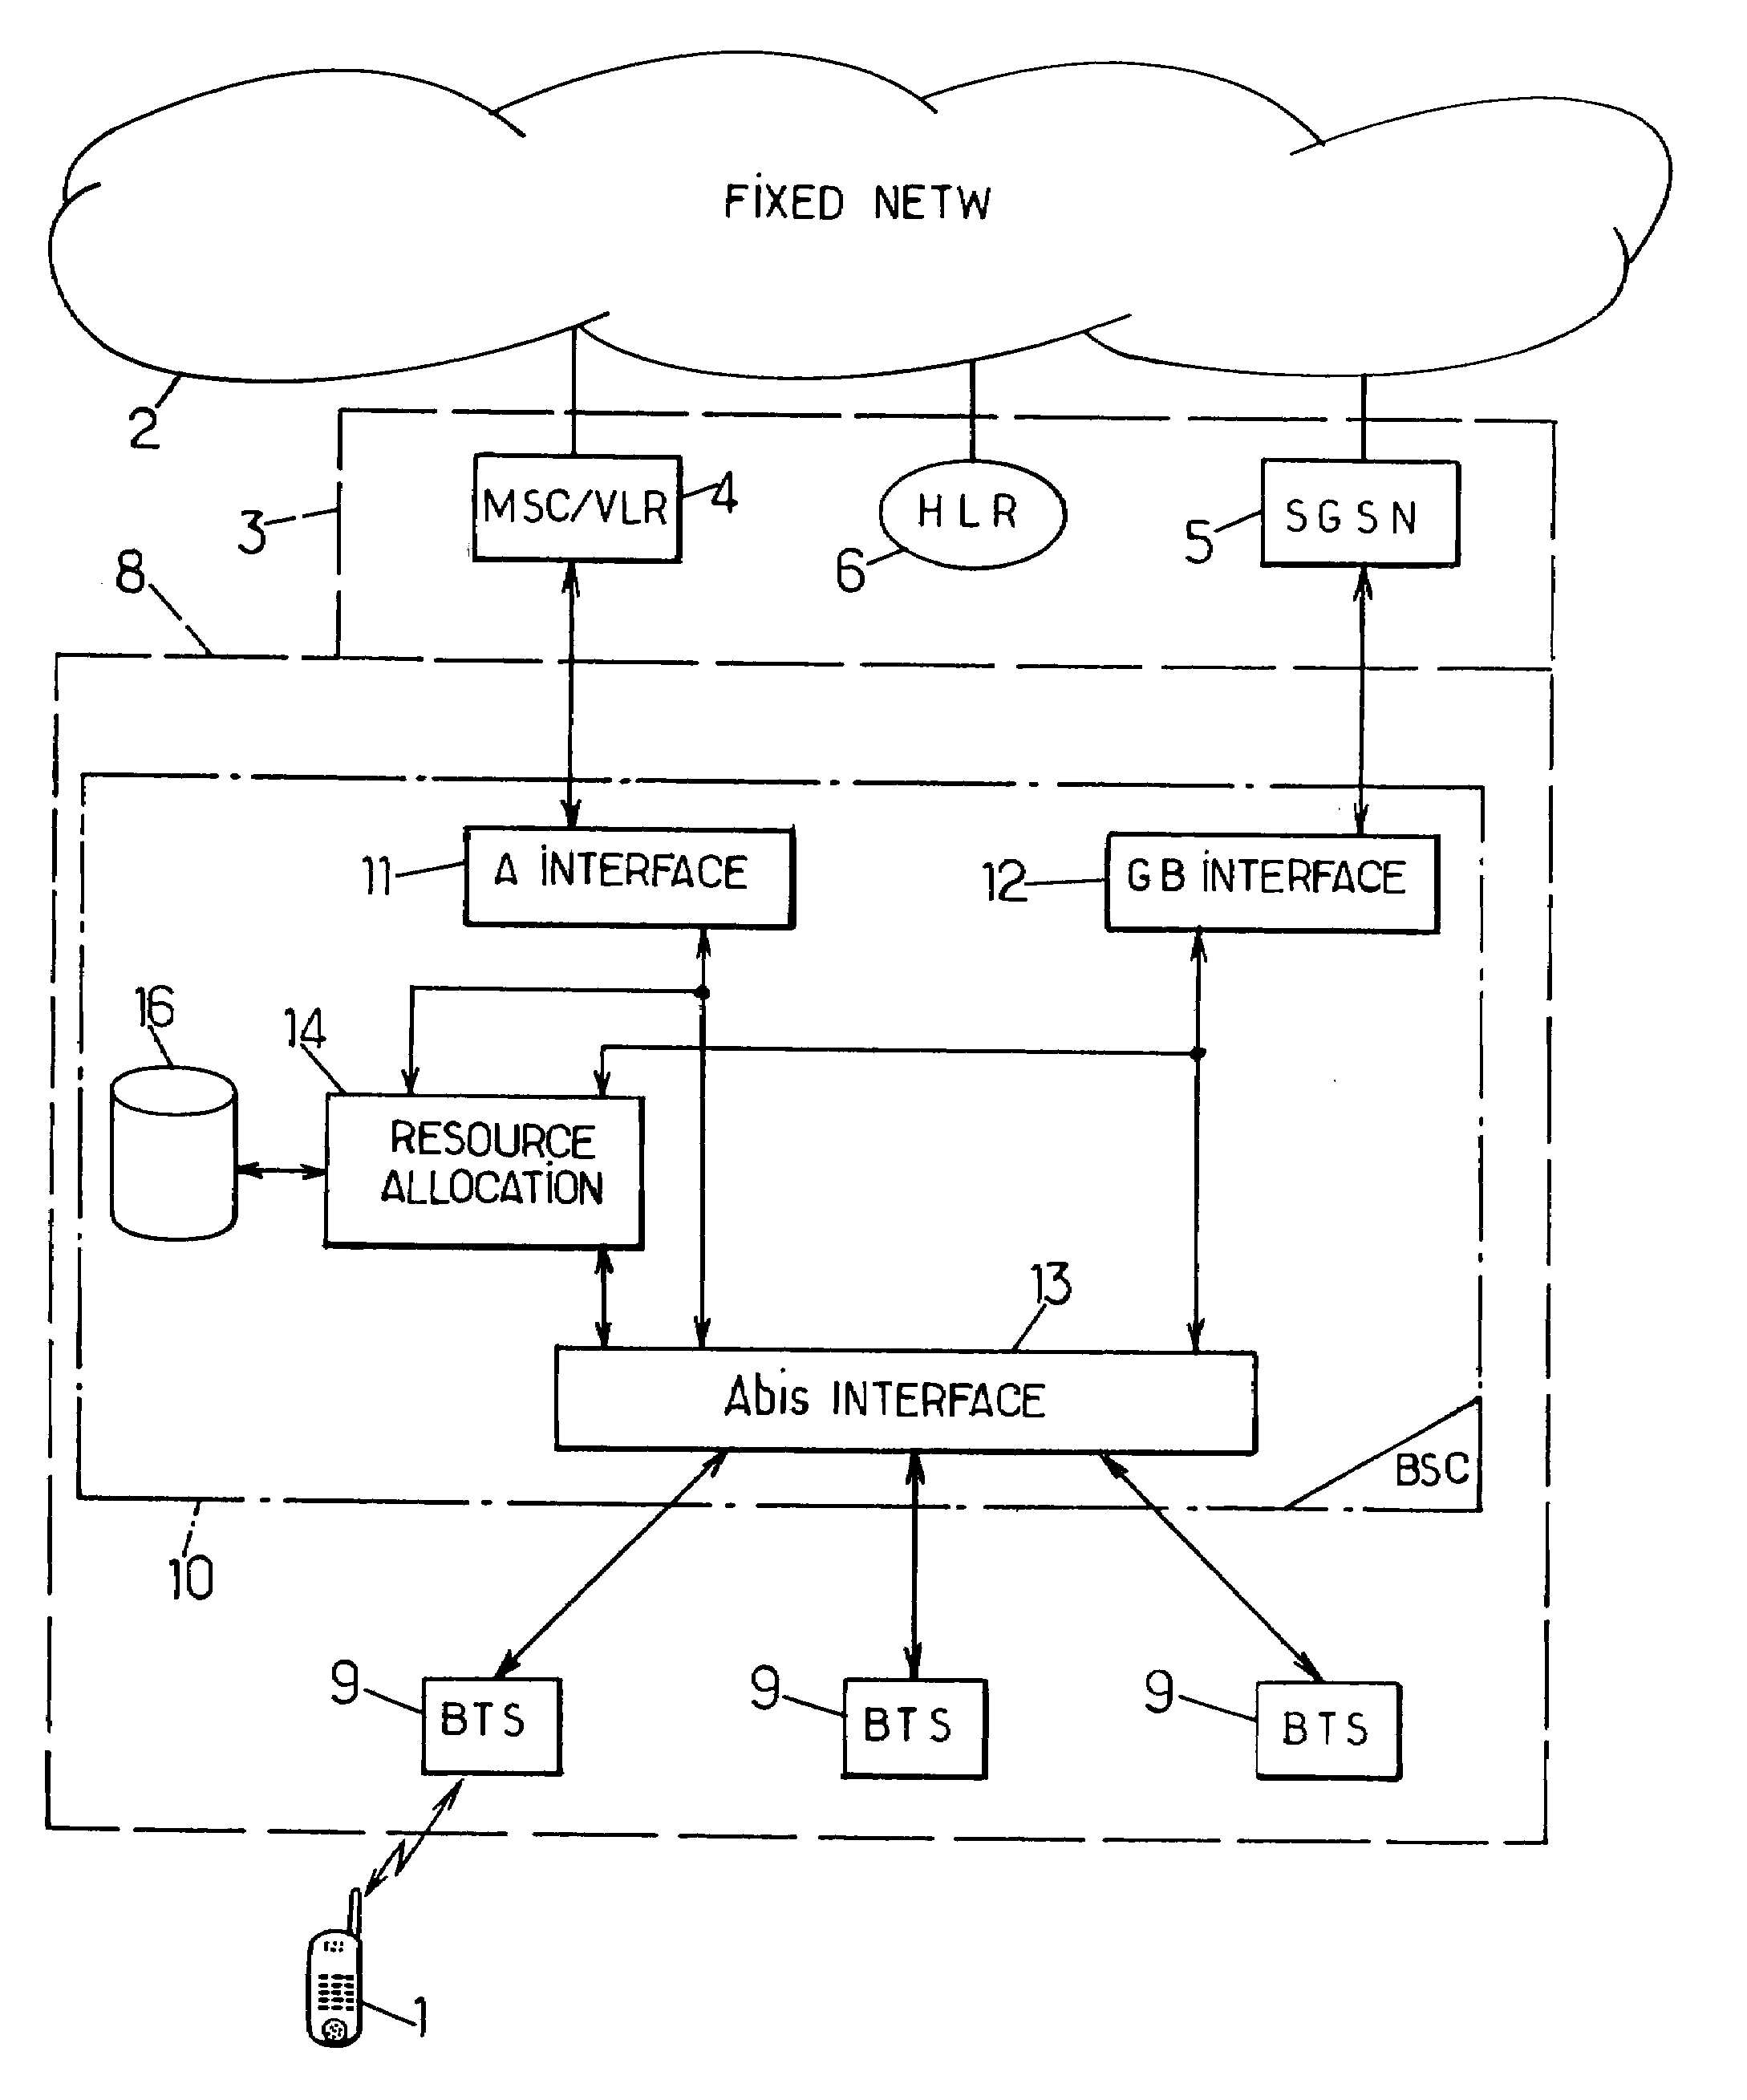 Method and system for supplying services to mobile stations in active mode